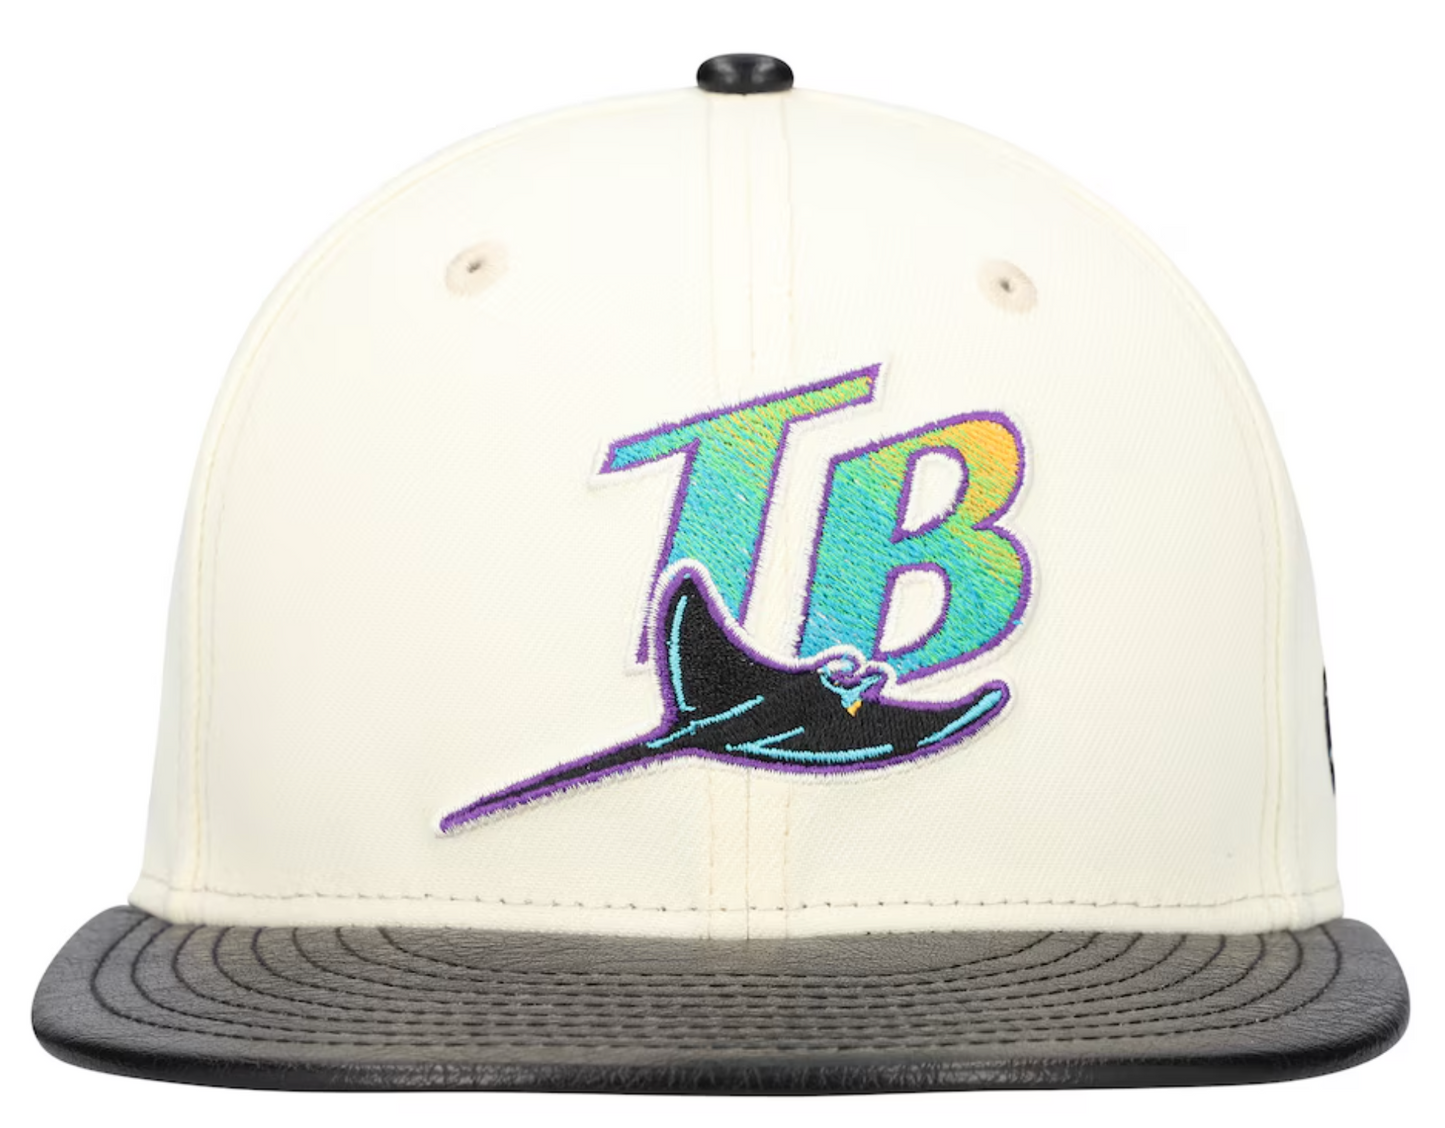 Tampa Bay Devil Rays Cooperstown Collection Cream/Black Leather Visor New Era 59FIFTY Fitted Hat